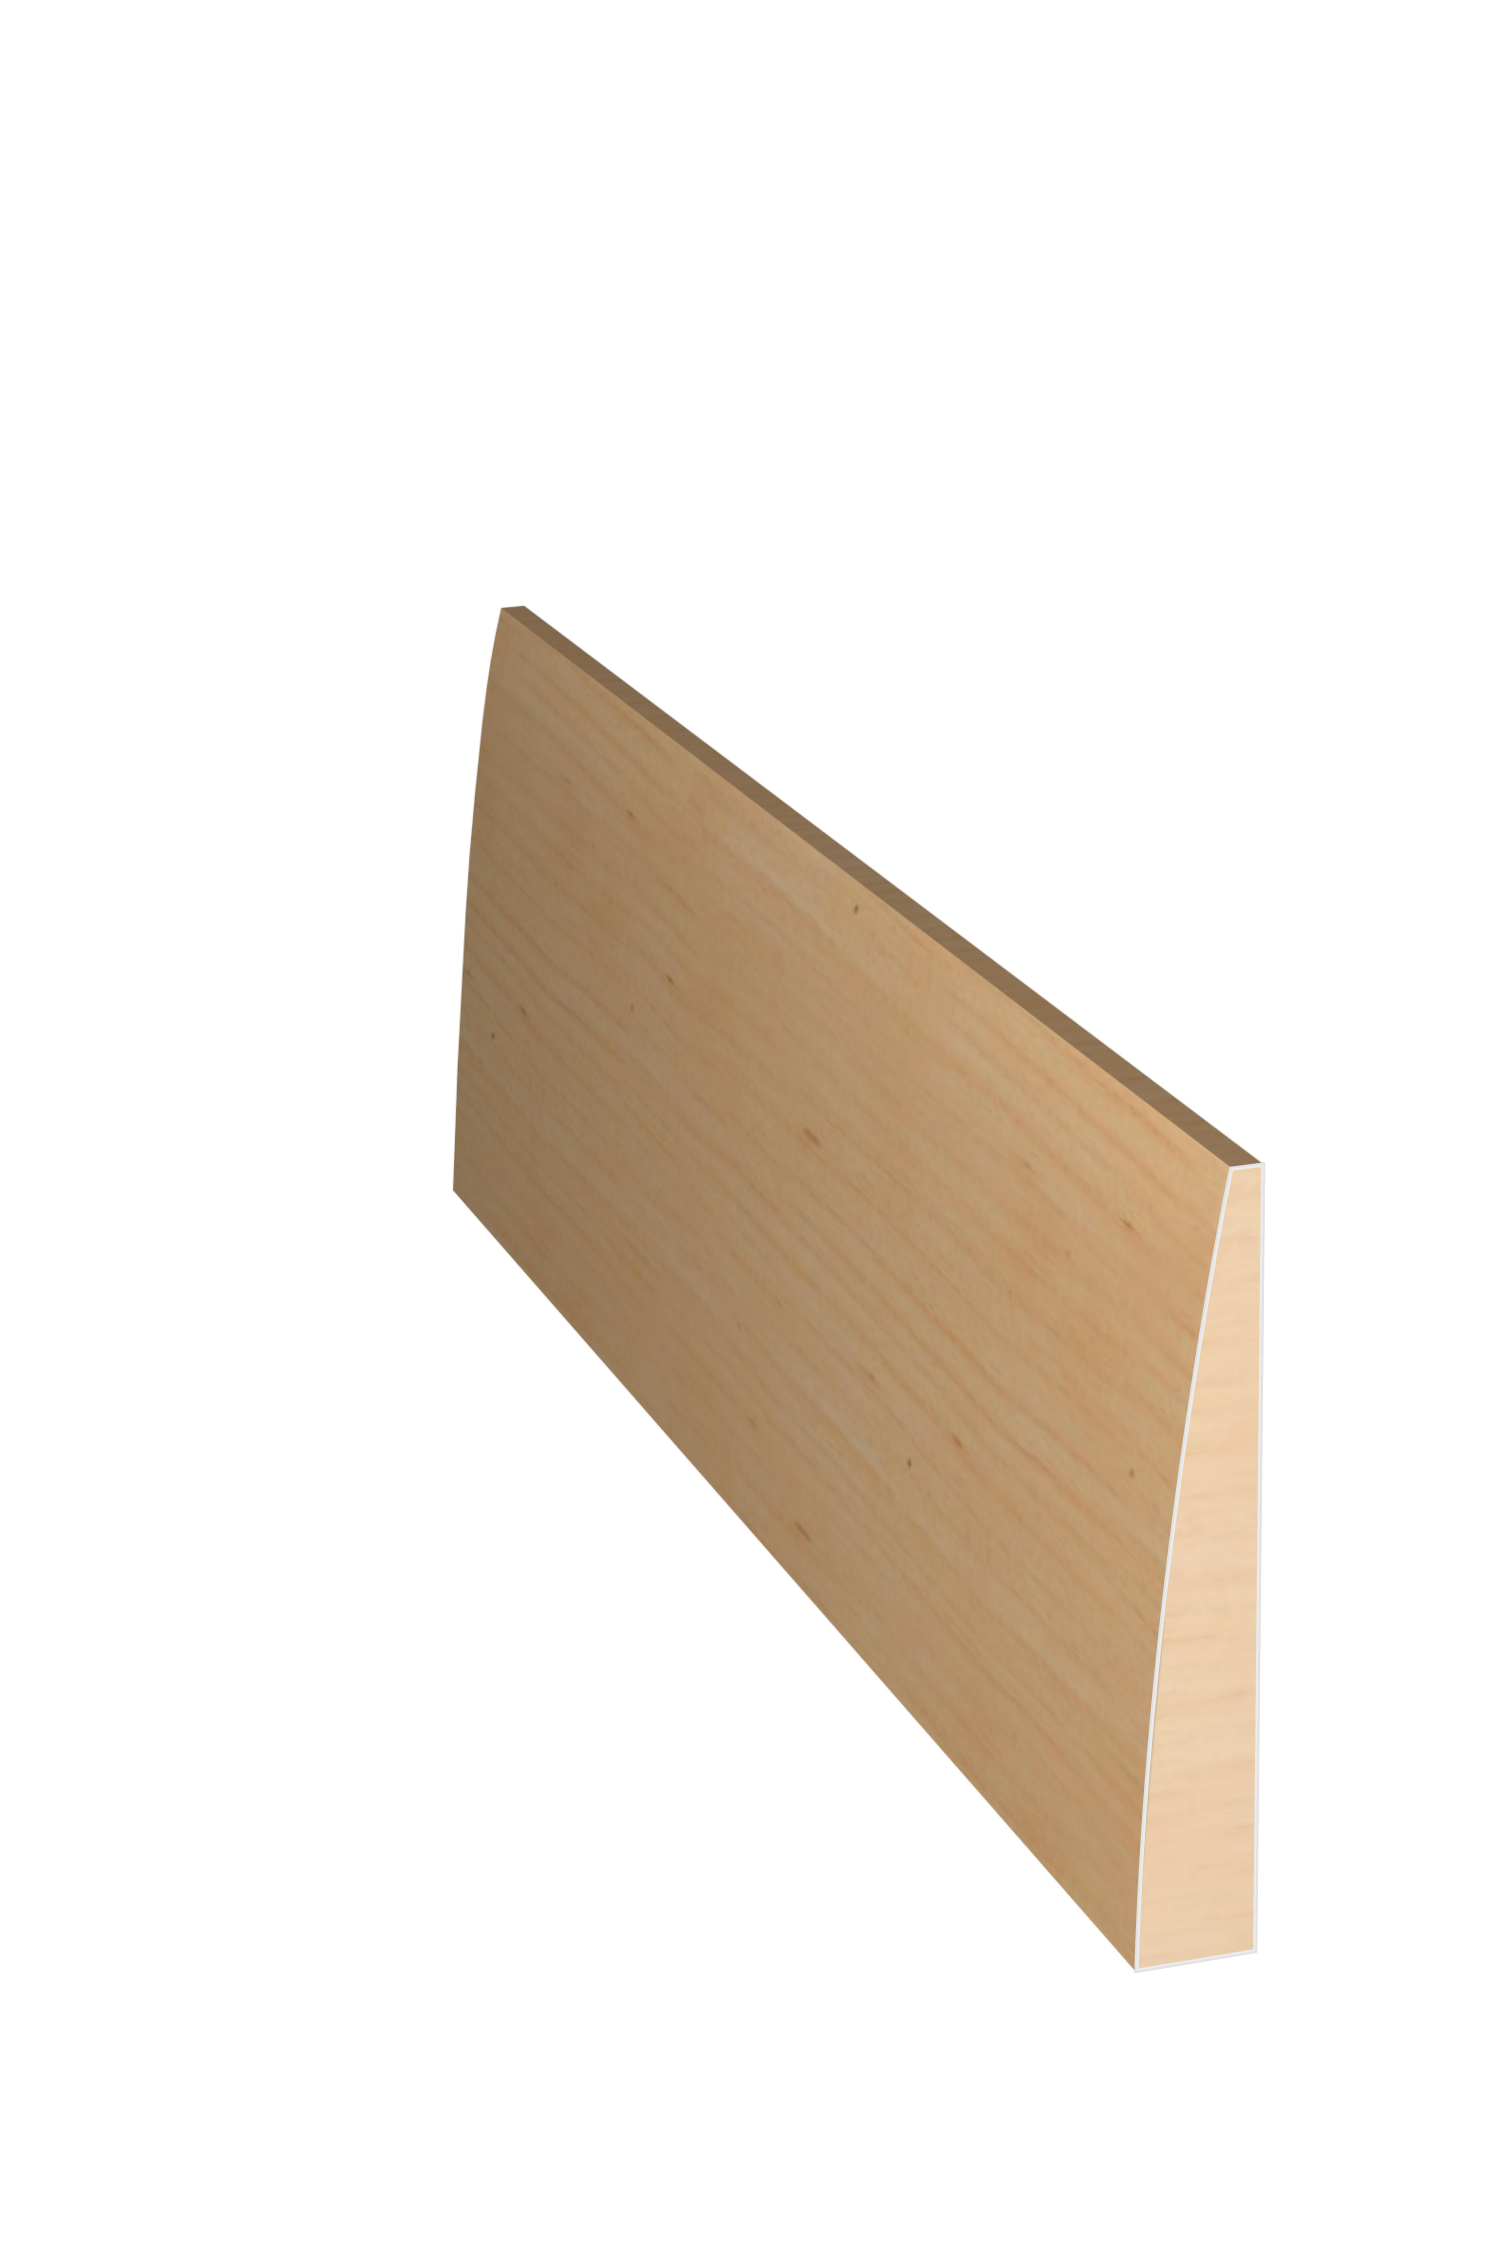 Three dimensional rendering of custom casing wood molding CAPL22 made by Public Lumber Company in Detroit.